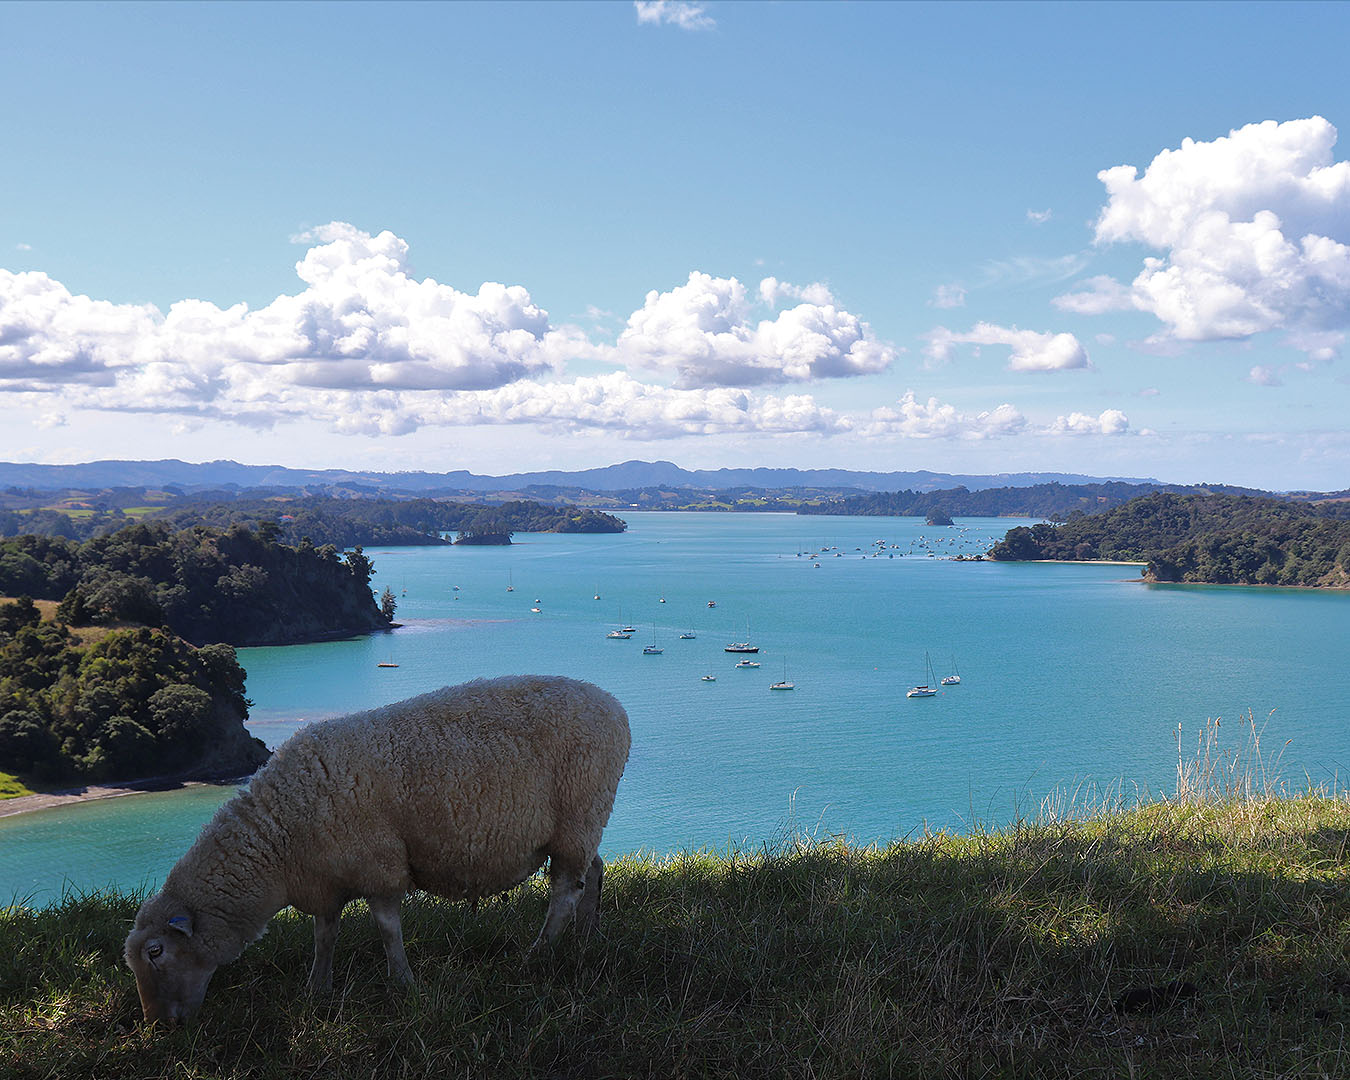 A sheep grazes lazily in the foreground with boats and water in the background.